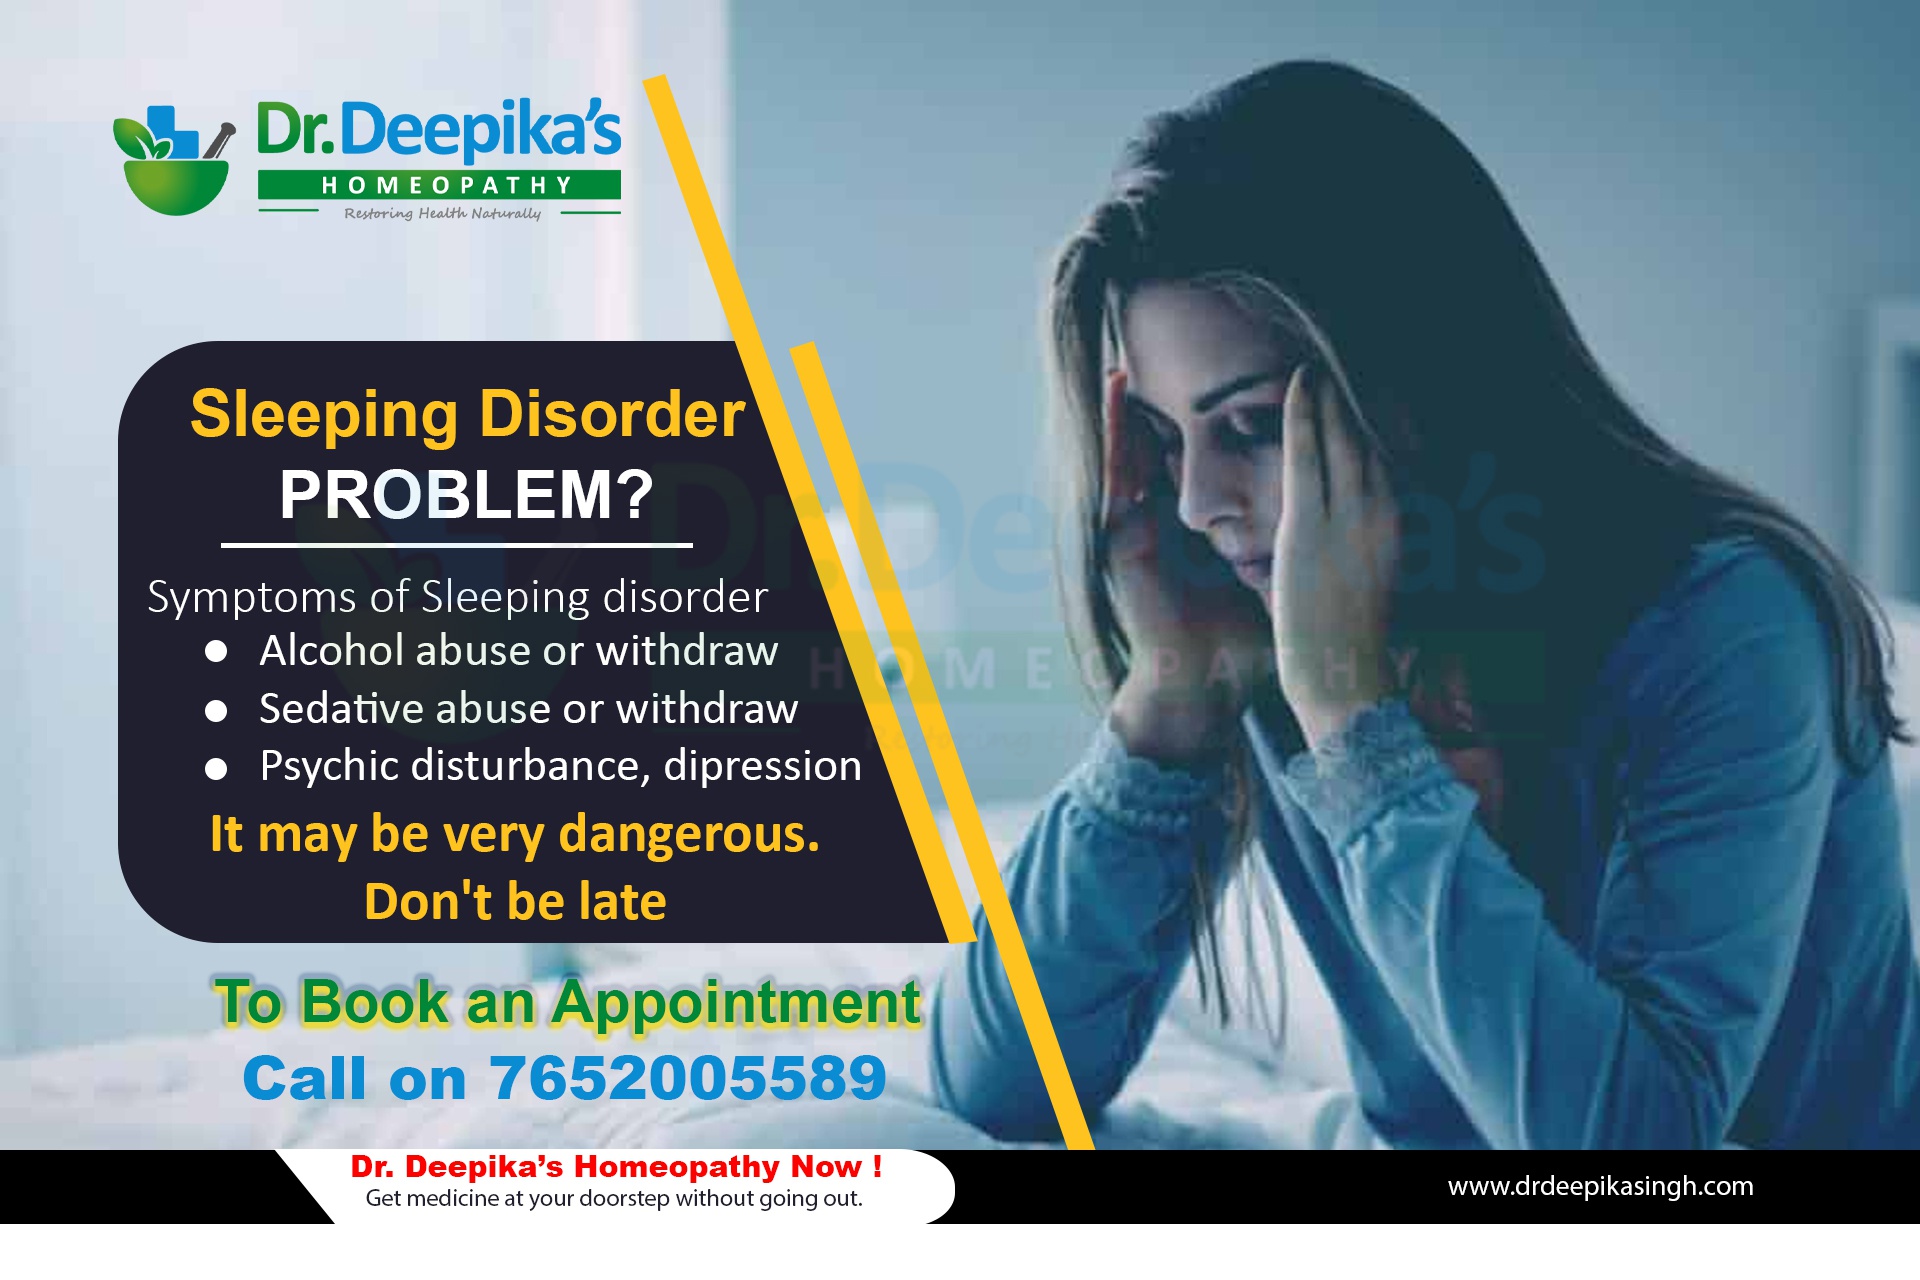 What is Sleeping disorder disease? & How it can cure naturally using homeopathy?